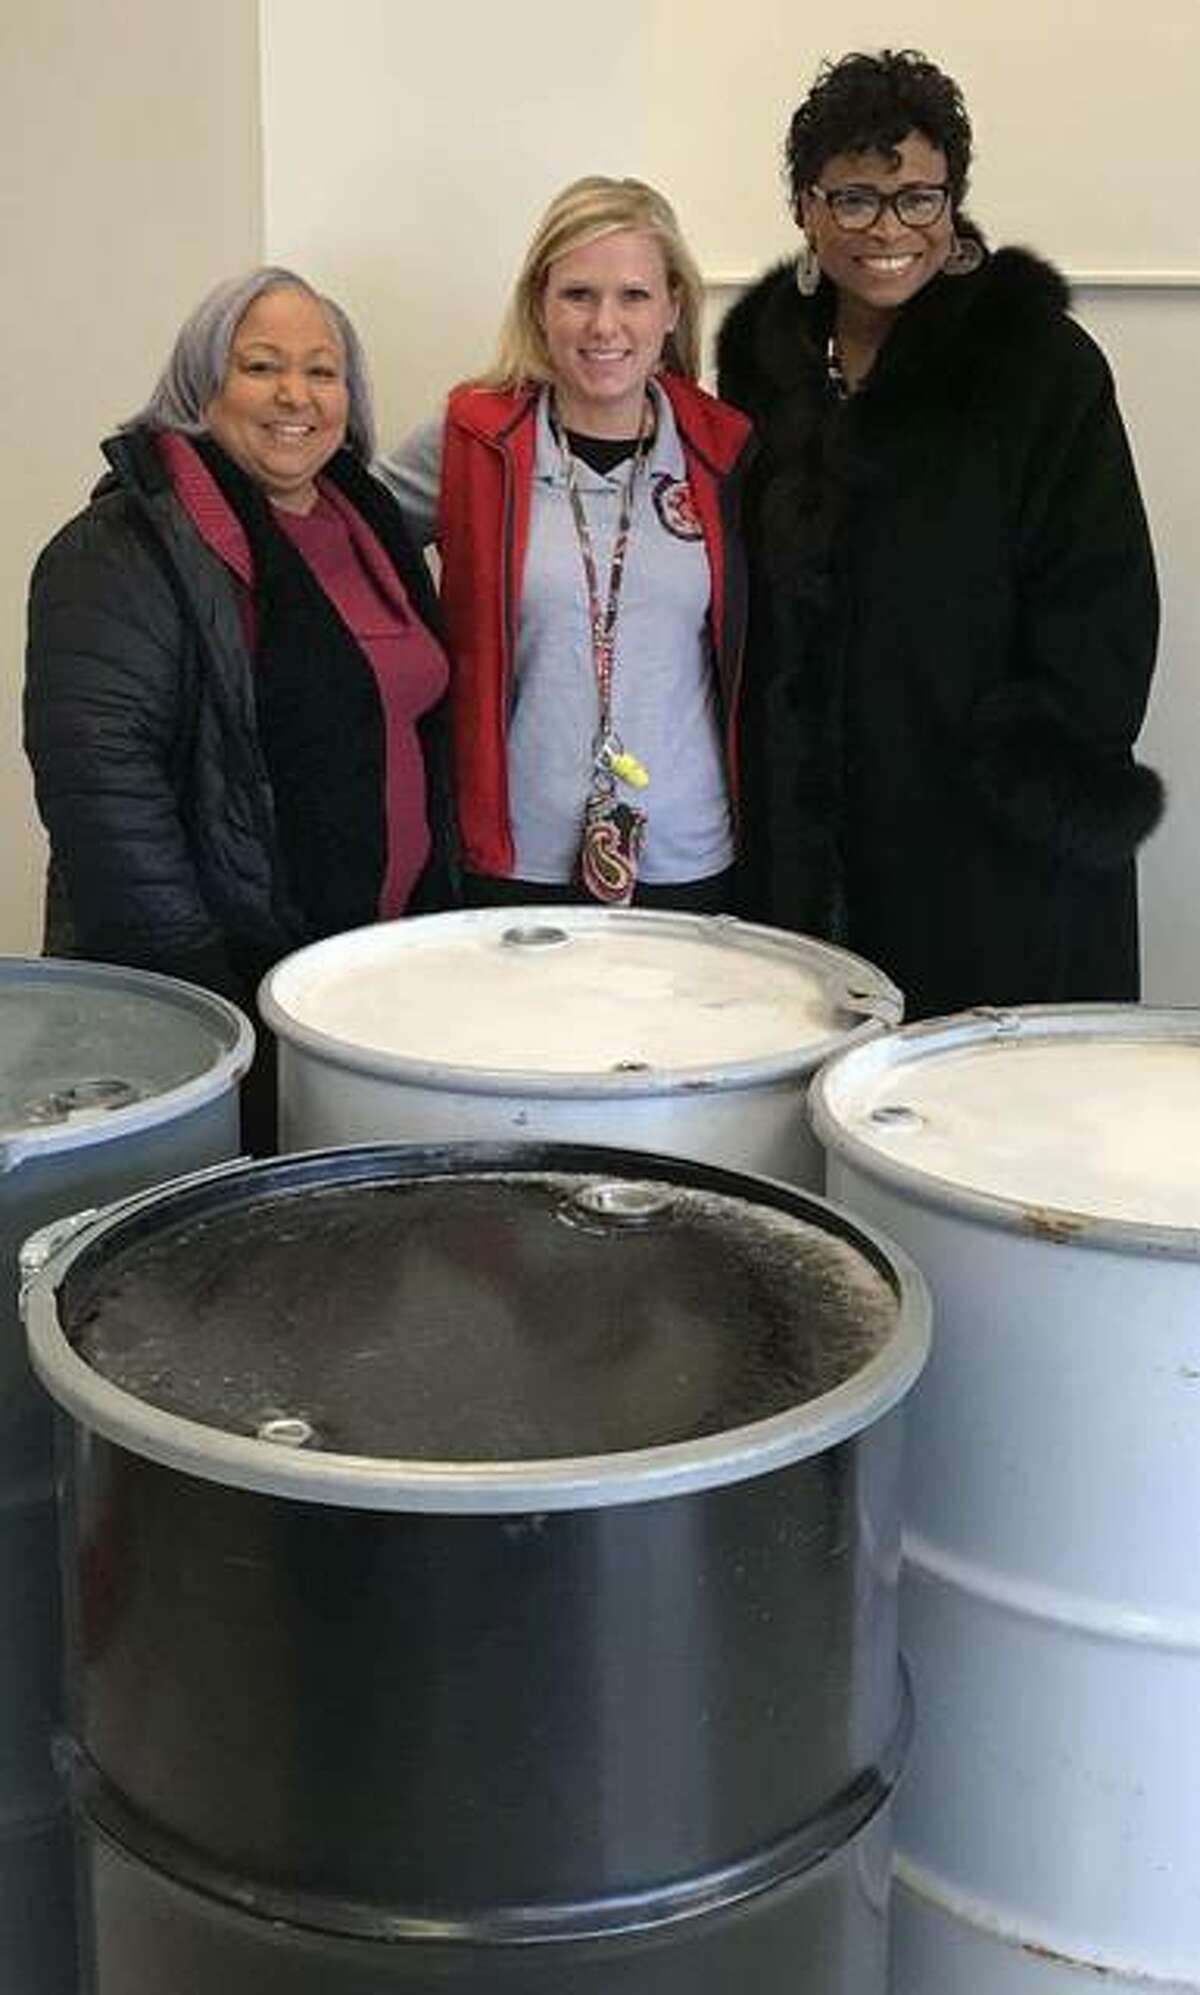 Alderwoman Tammy Smith, 4th Ward; Principal Lanea DeConcini of East Elementary School; and the Rev. Sheila Goins with some of the metal drums the James Killion Beautification Enhancement Committee is having students decorate. The city will place the decorated bins at James H. Killion Park at Salu this spring. Smith and Goins are members of the committee.